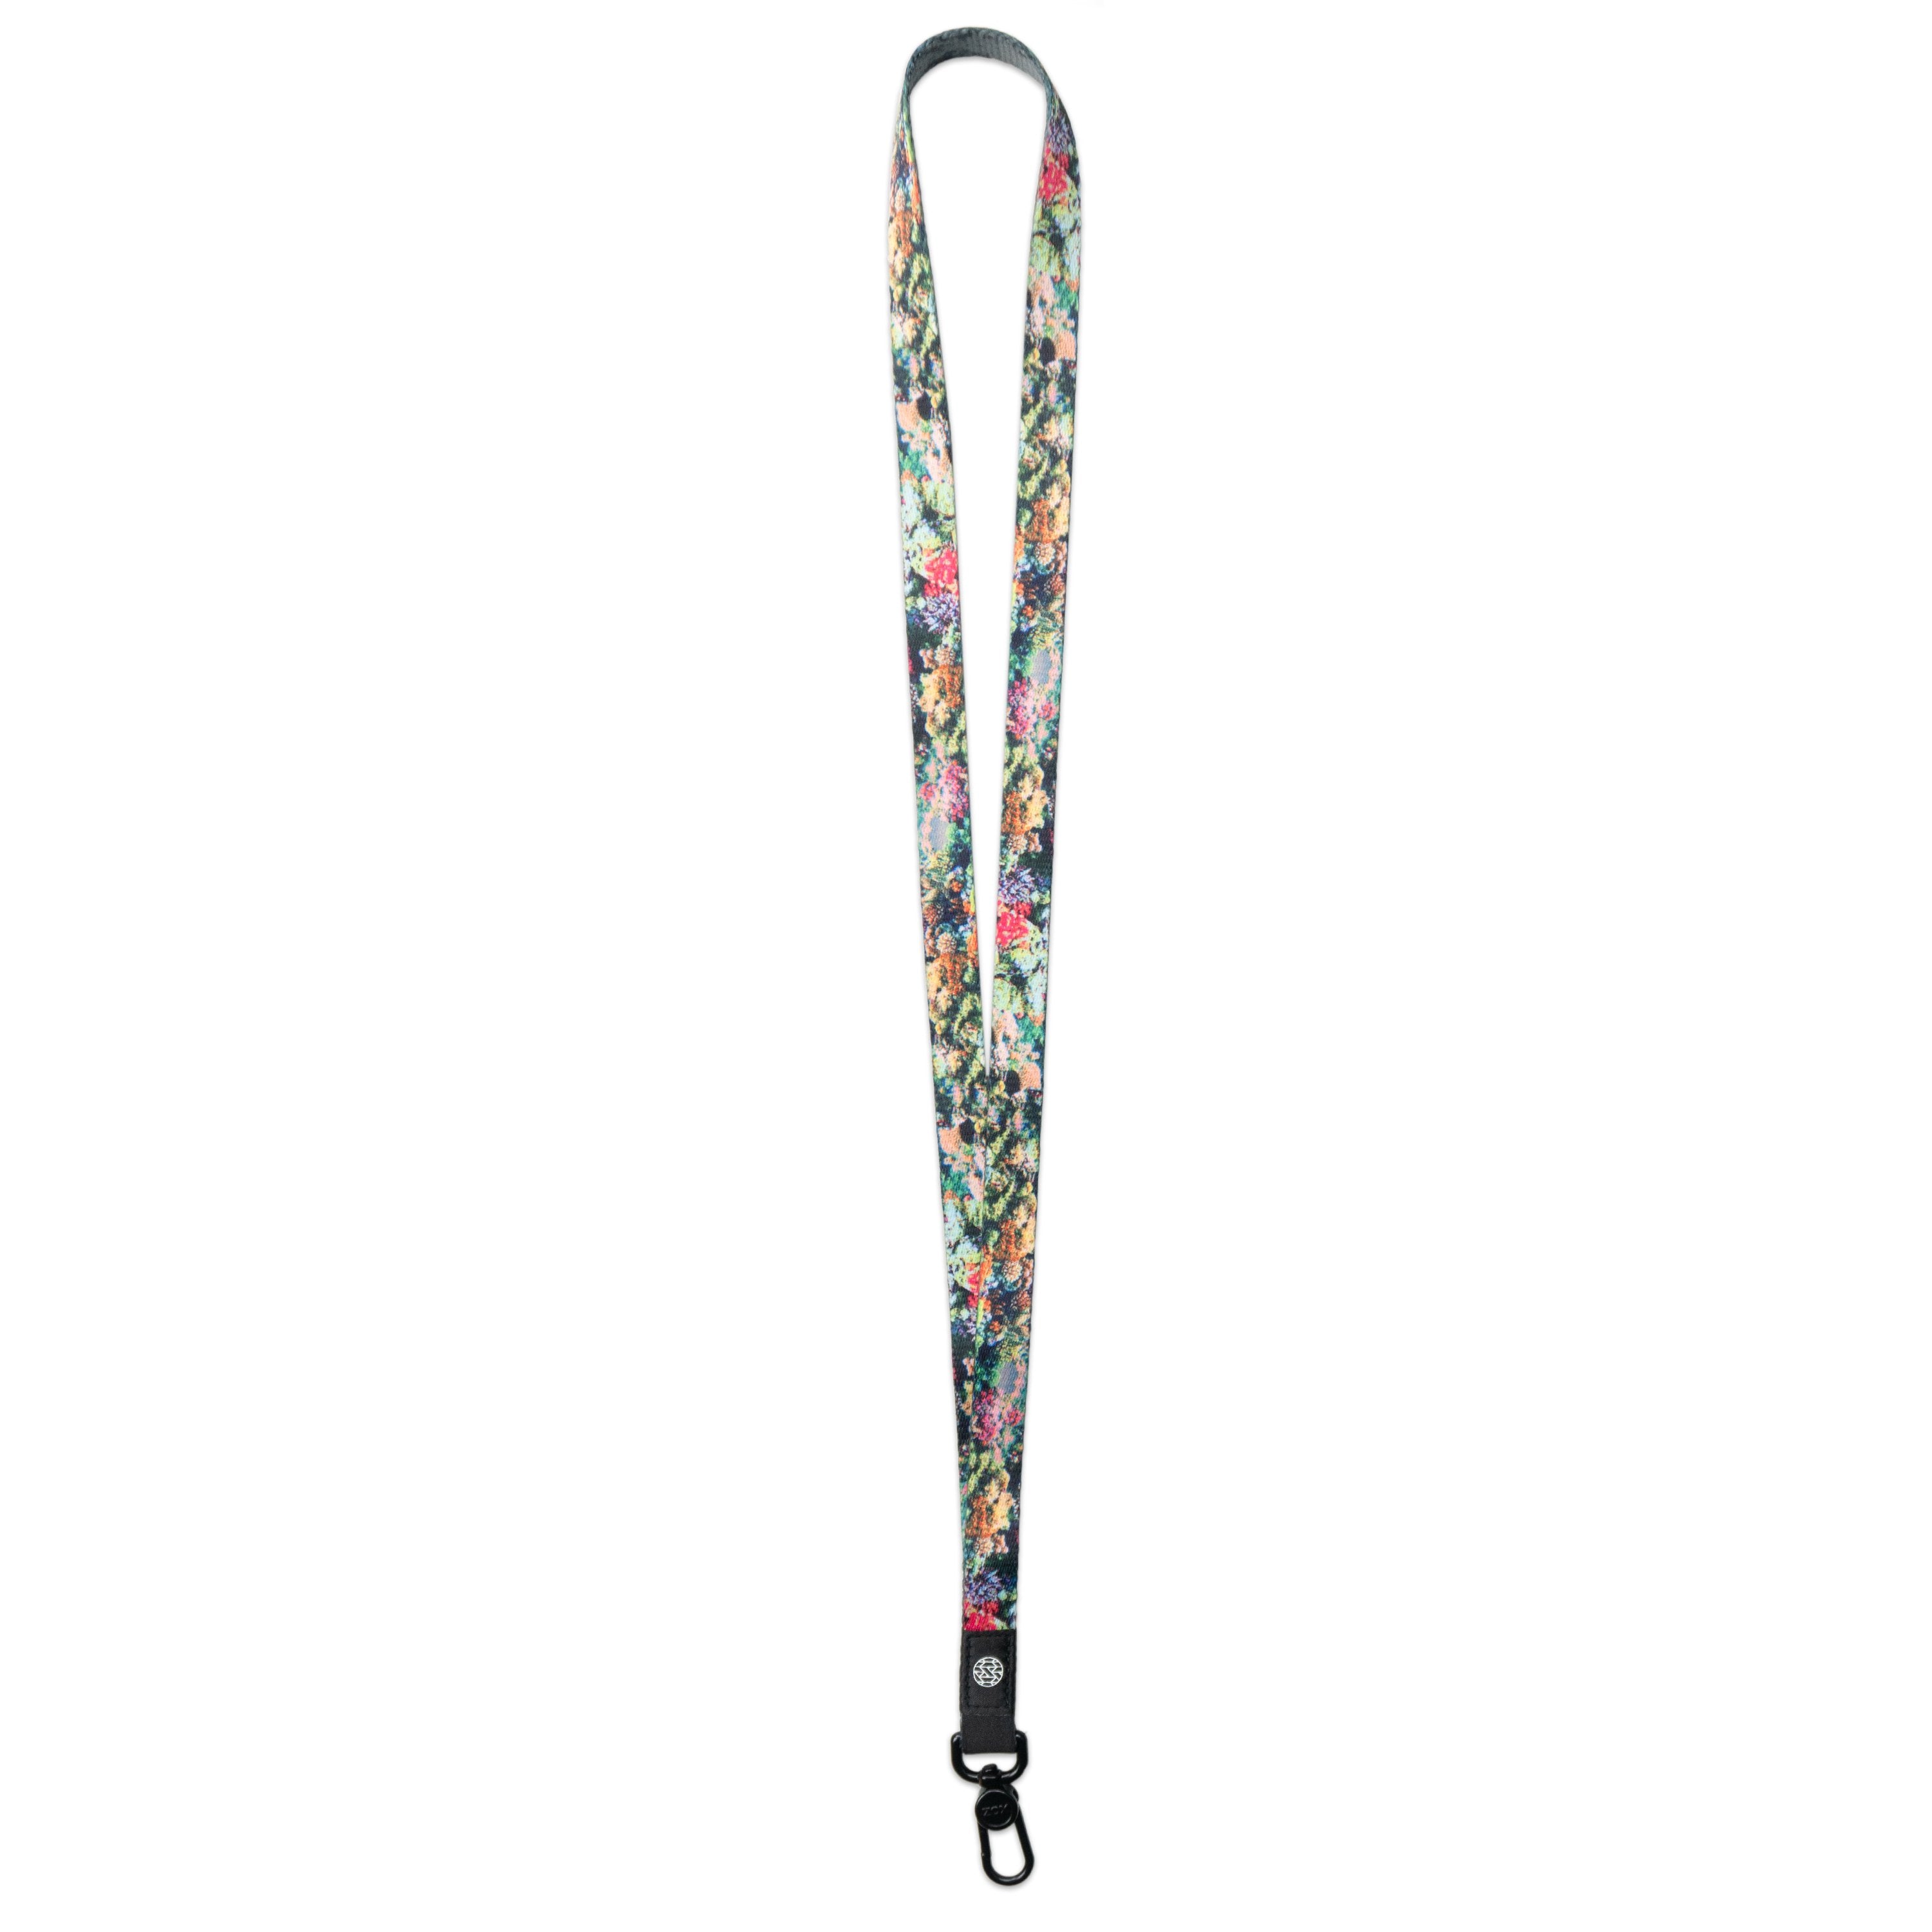 A product image of a ZOX lanyard showing the front of the design with a black colored metal clip. The lanyard is called Stronger With Every Struggle and the design is a photo of a coral reef that has different shades of green, pink, blue, purple and orange 